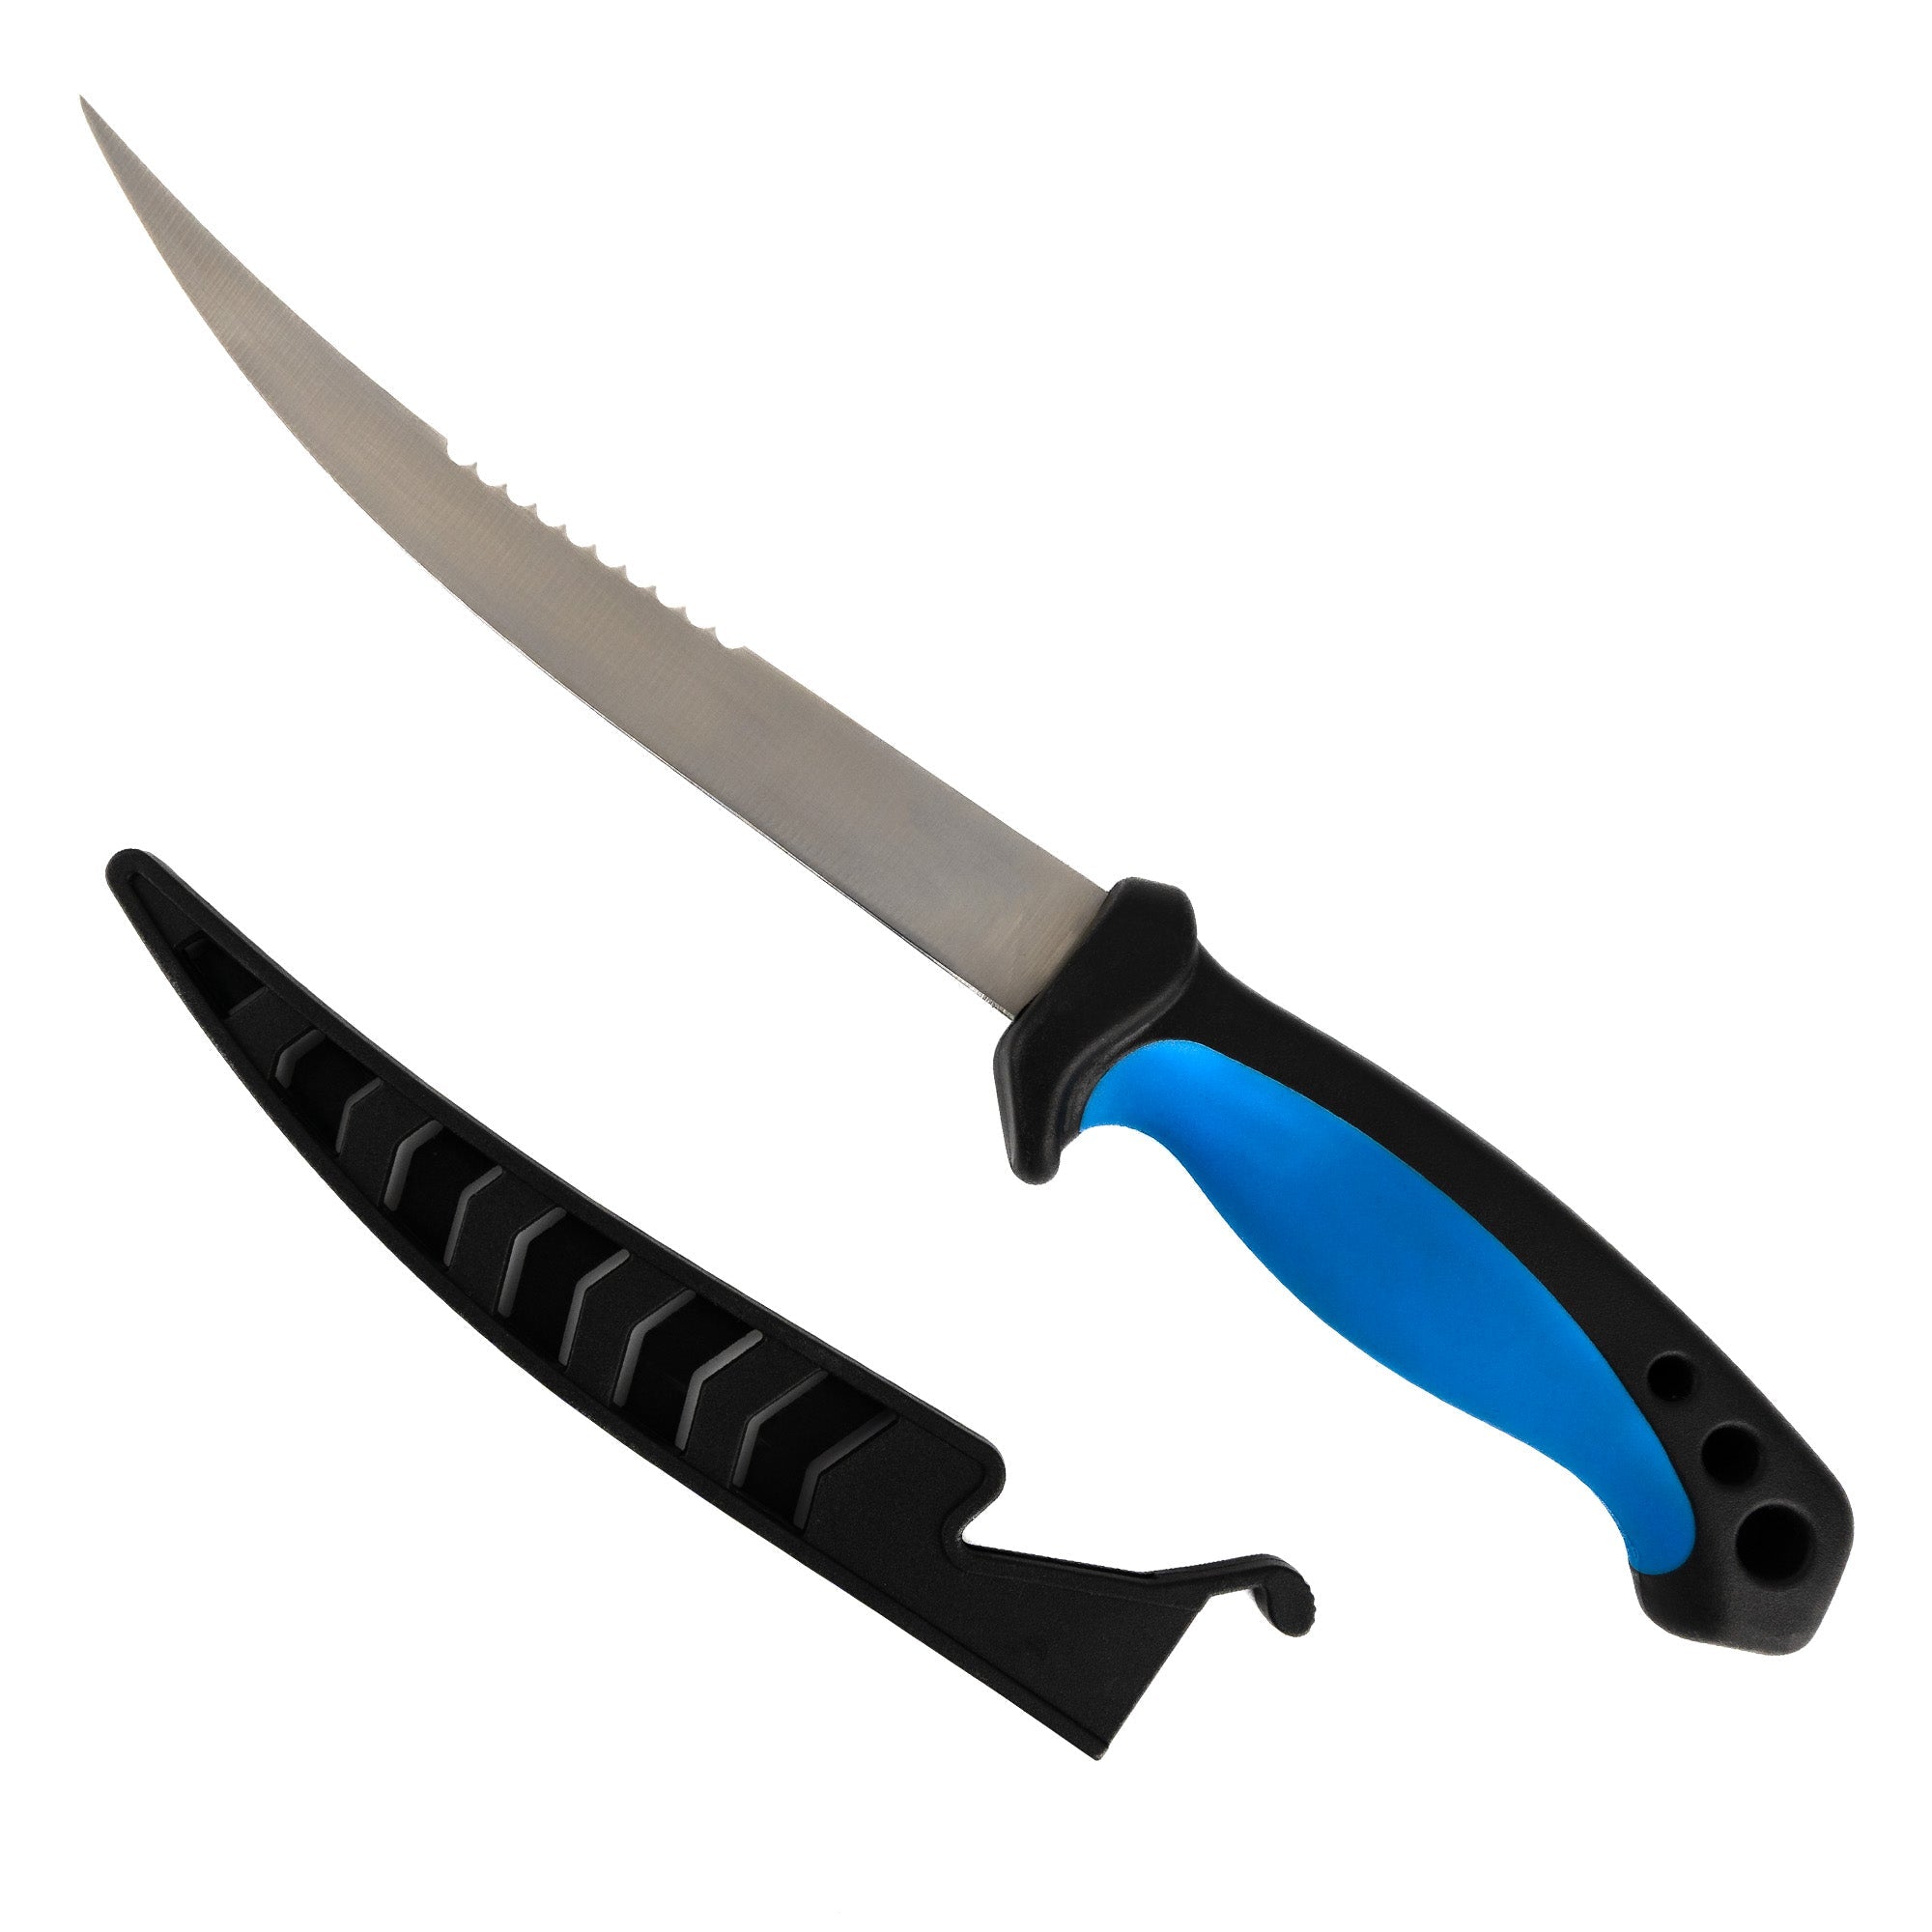 Scaler Knife with Serrated Stainless Steel Blade